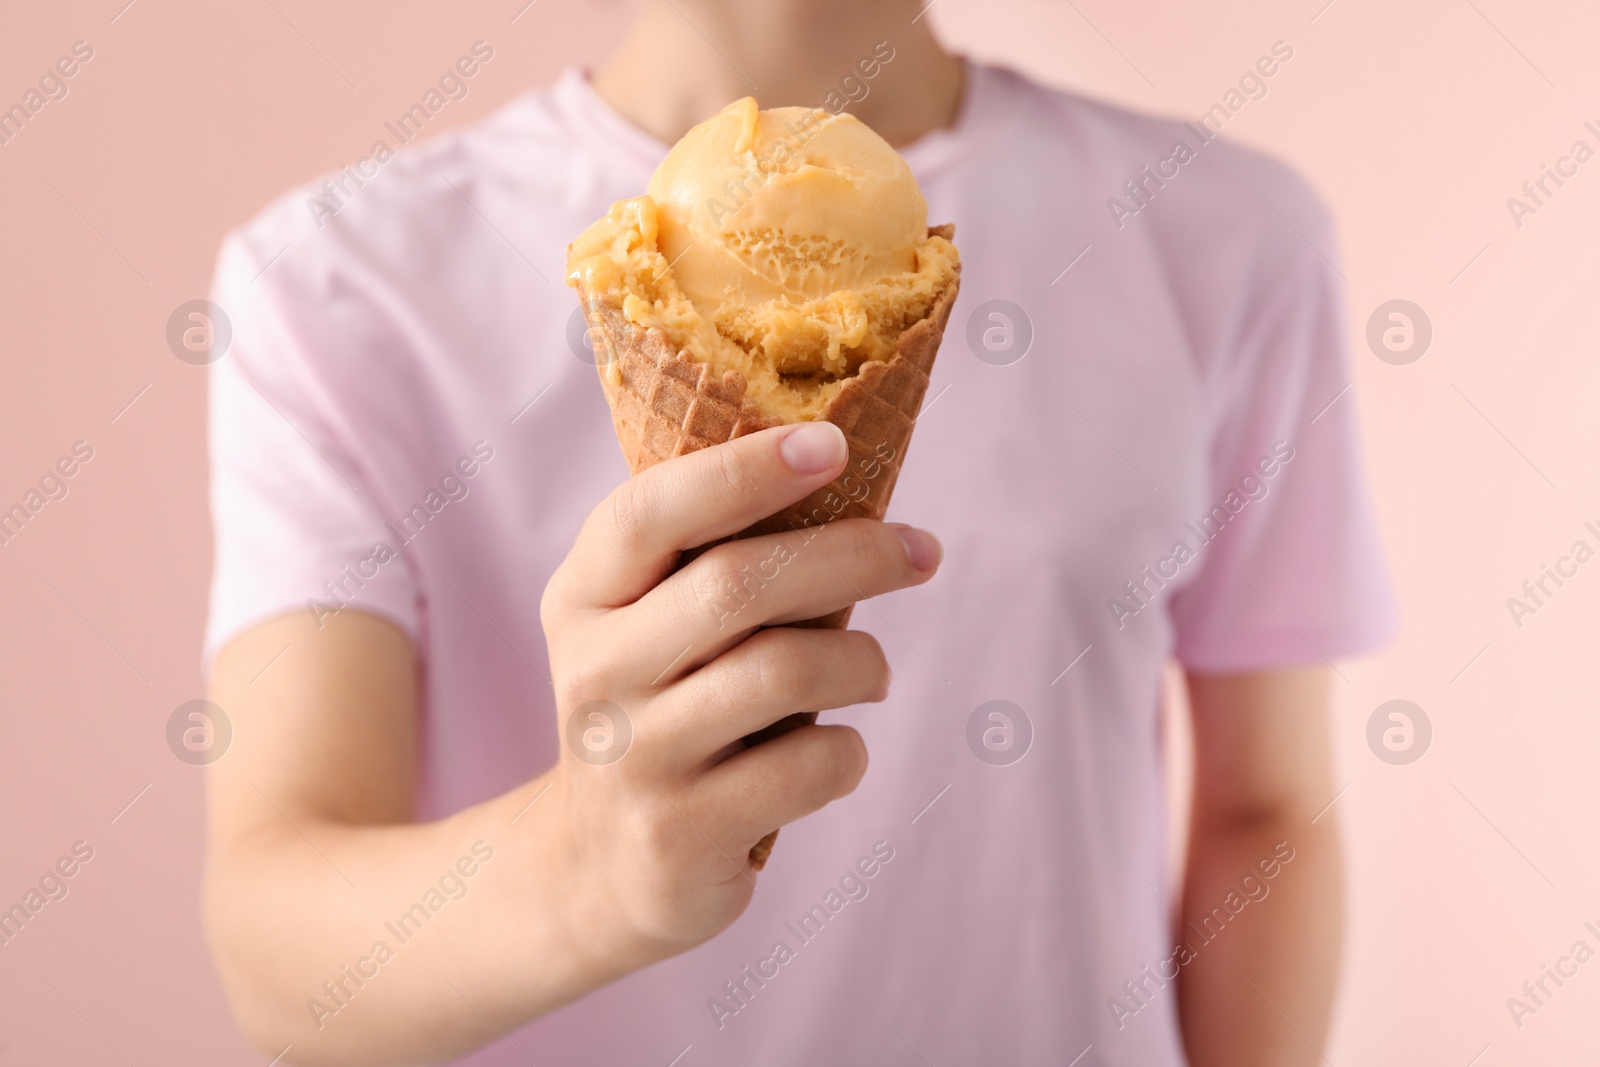 Photo of Woman holding yellow ice cream in wafer cone on pink background, closeup